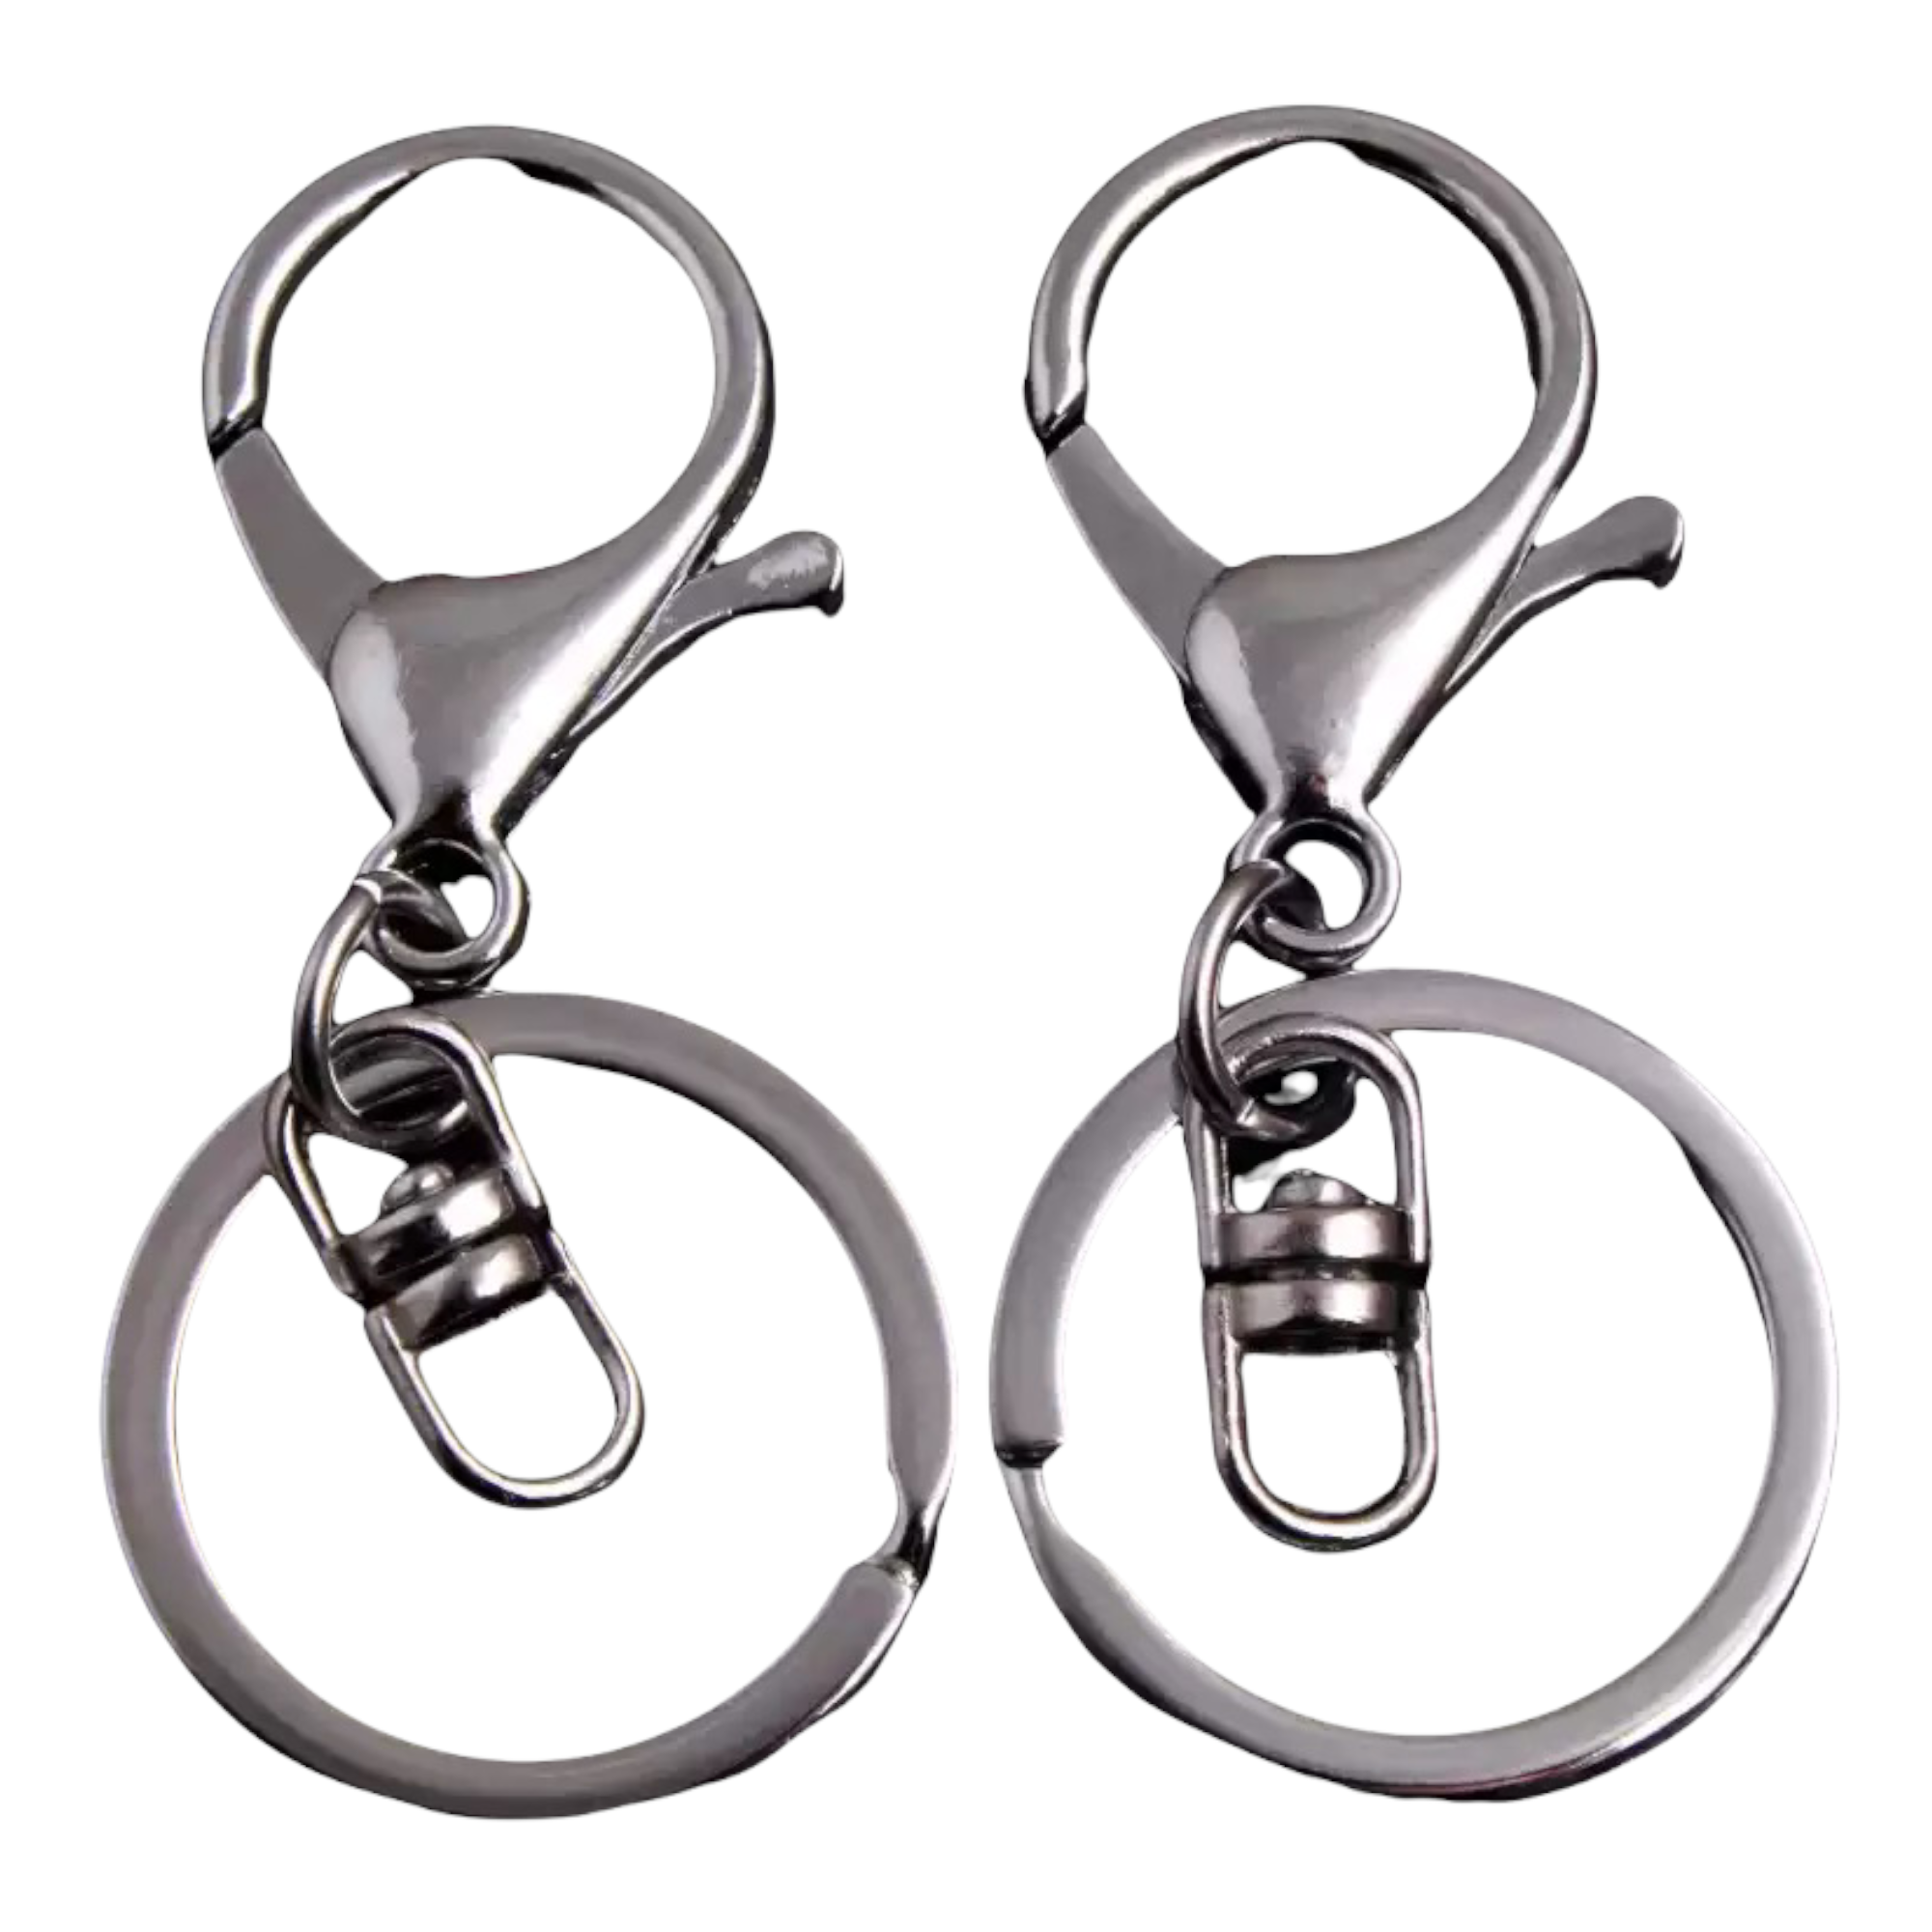 Big Trigger Hooks / Lobster Clasp (24mm x 35mm / 4 pcs / Silver) Parrot  Clasps Key Holder Key Chain Key Ring Lanyard Connector F112